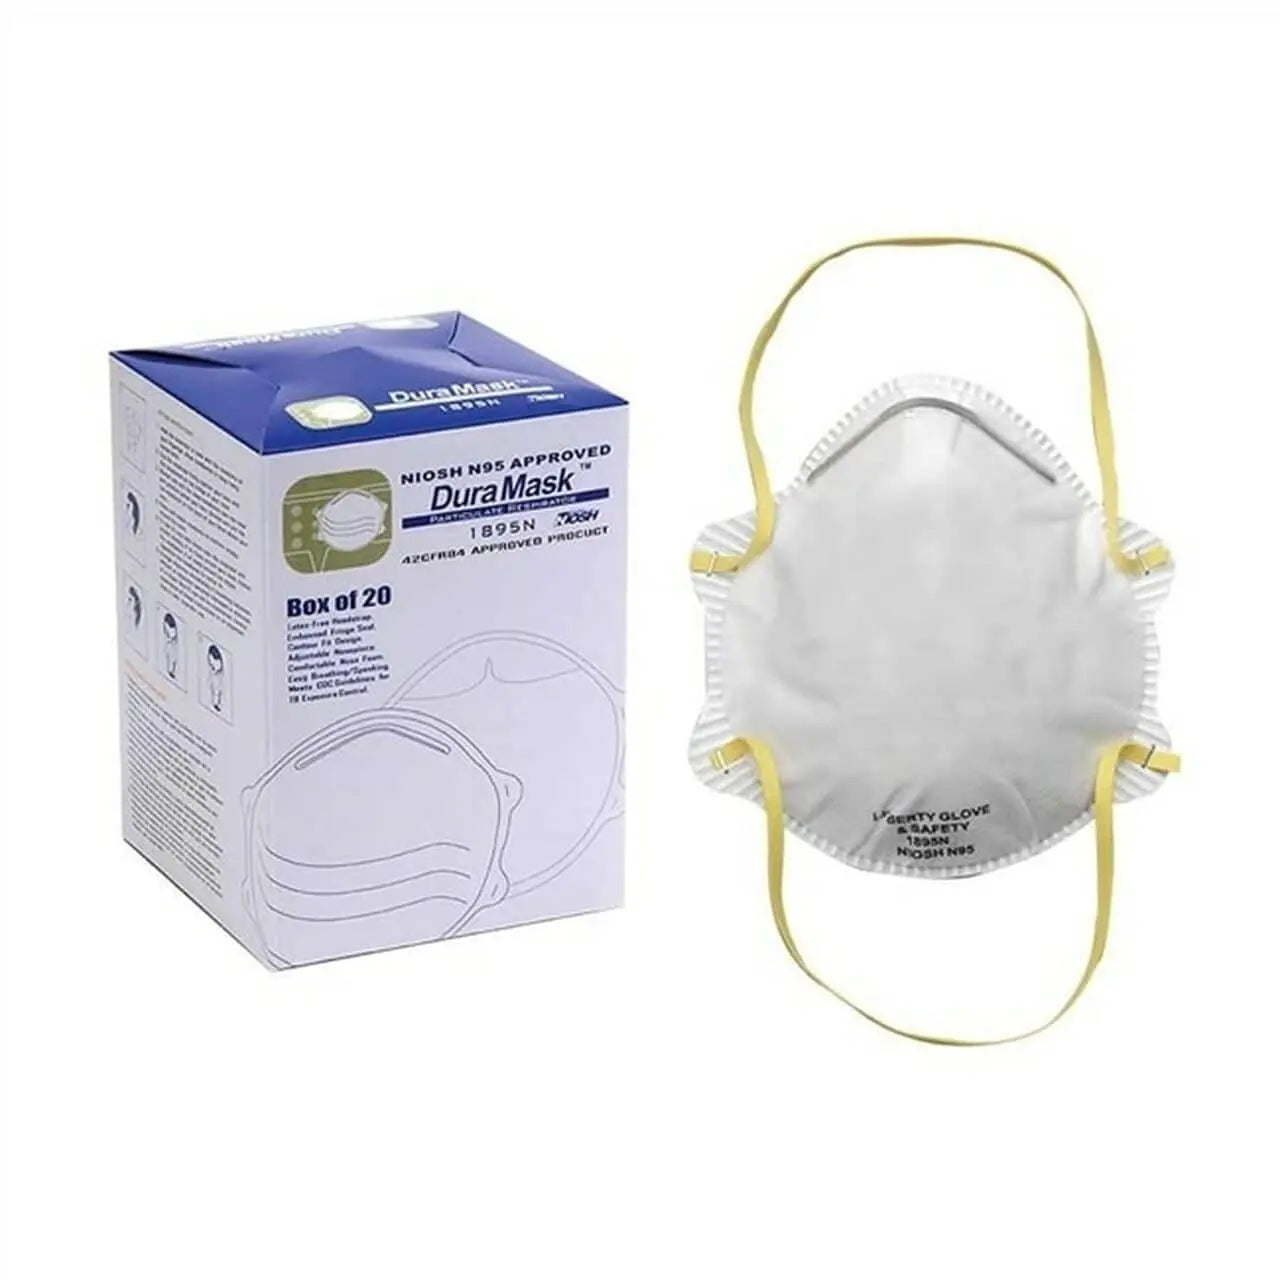 LIBERTY - Duramask NIOSH N95 Particulate Respirator with Head Straps (Box of 20)